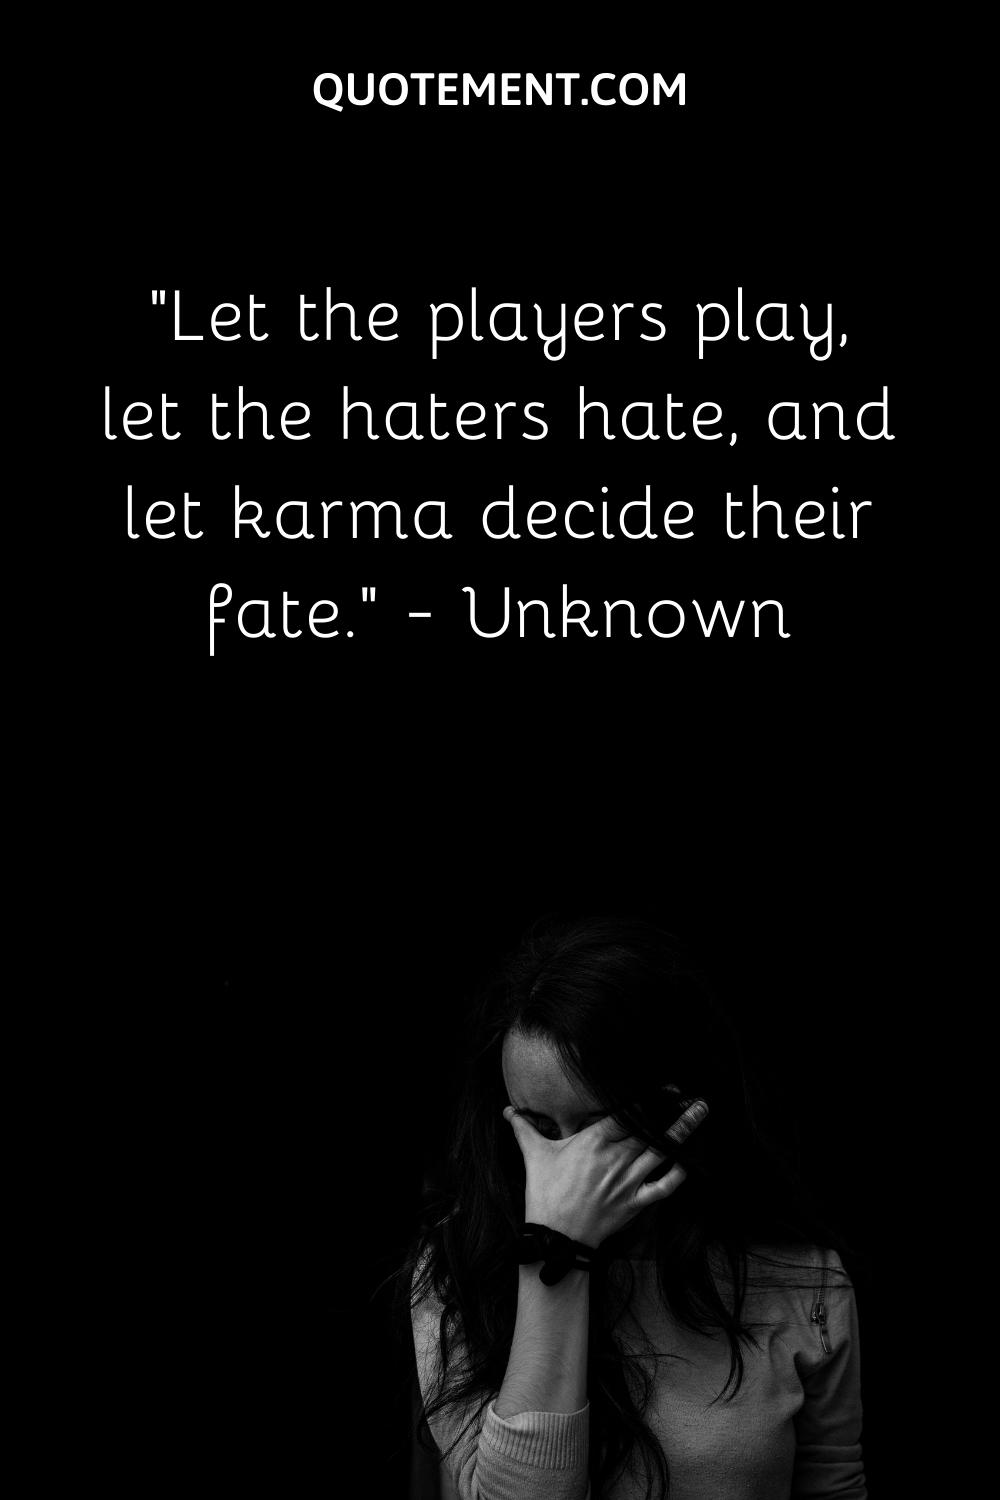 Let the players play, let the haters hate, and let karma decide their fate.